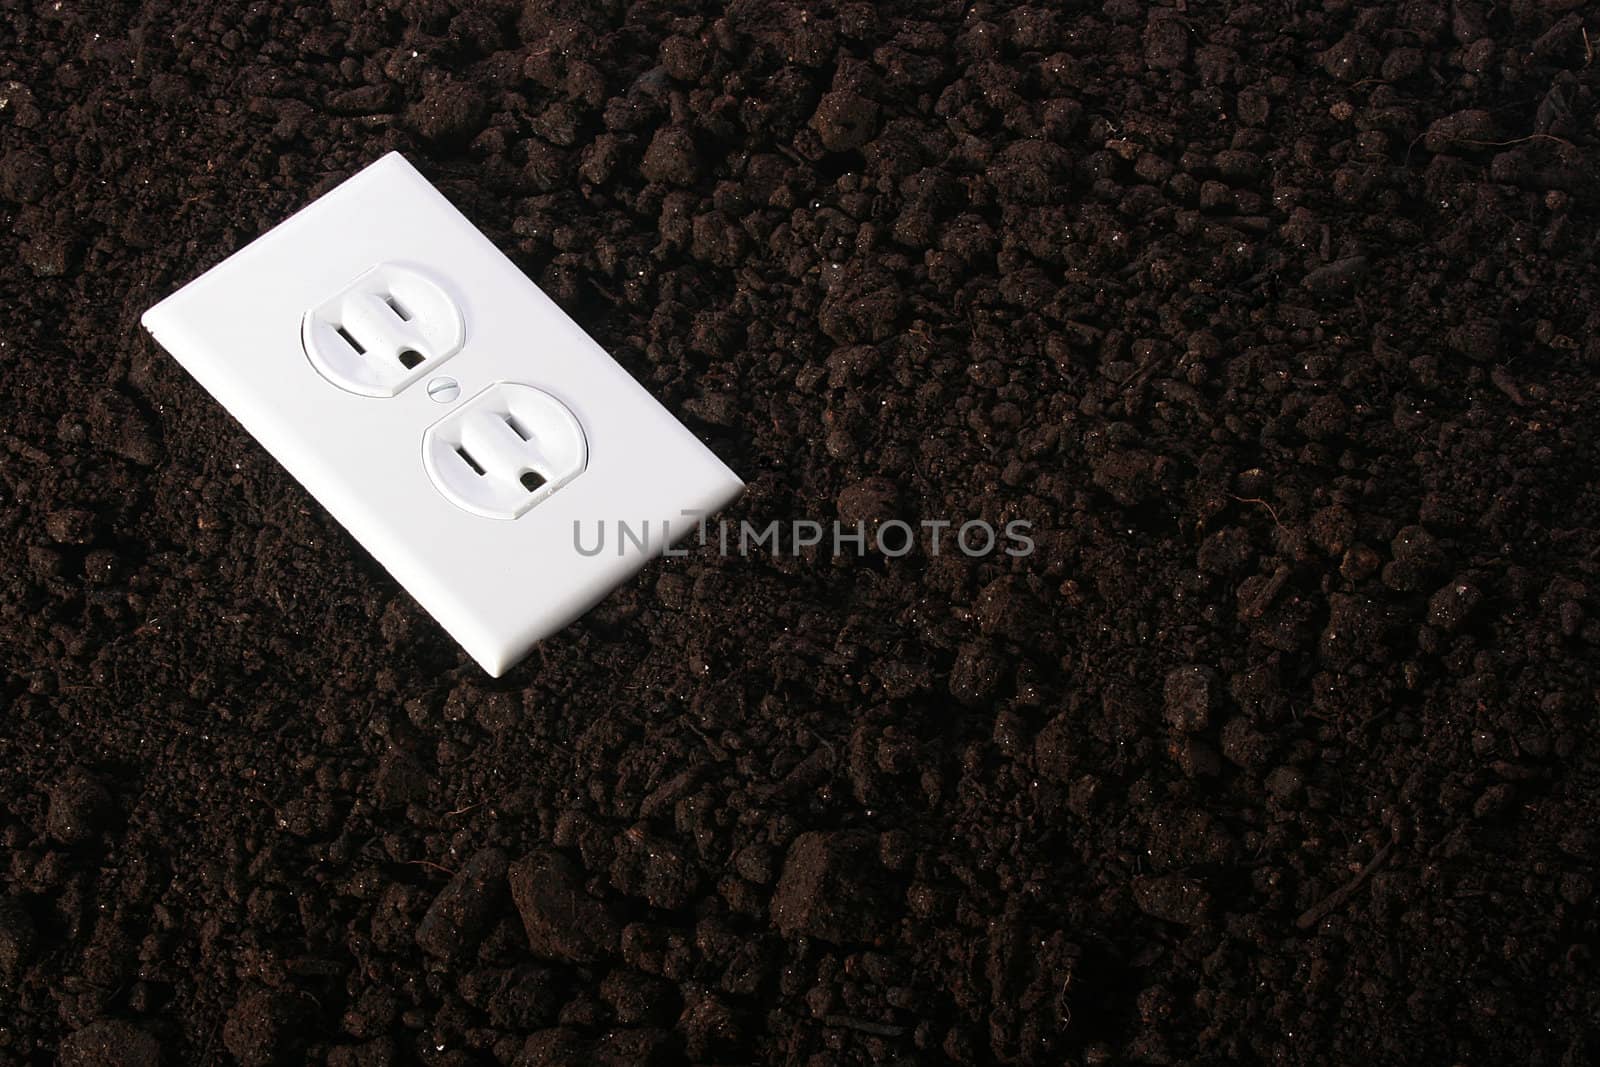 The electric socket against a ground - a symbol of an alternative energy source.